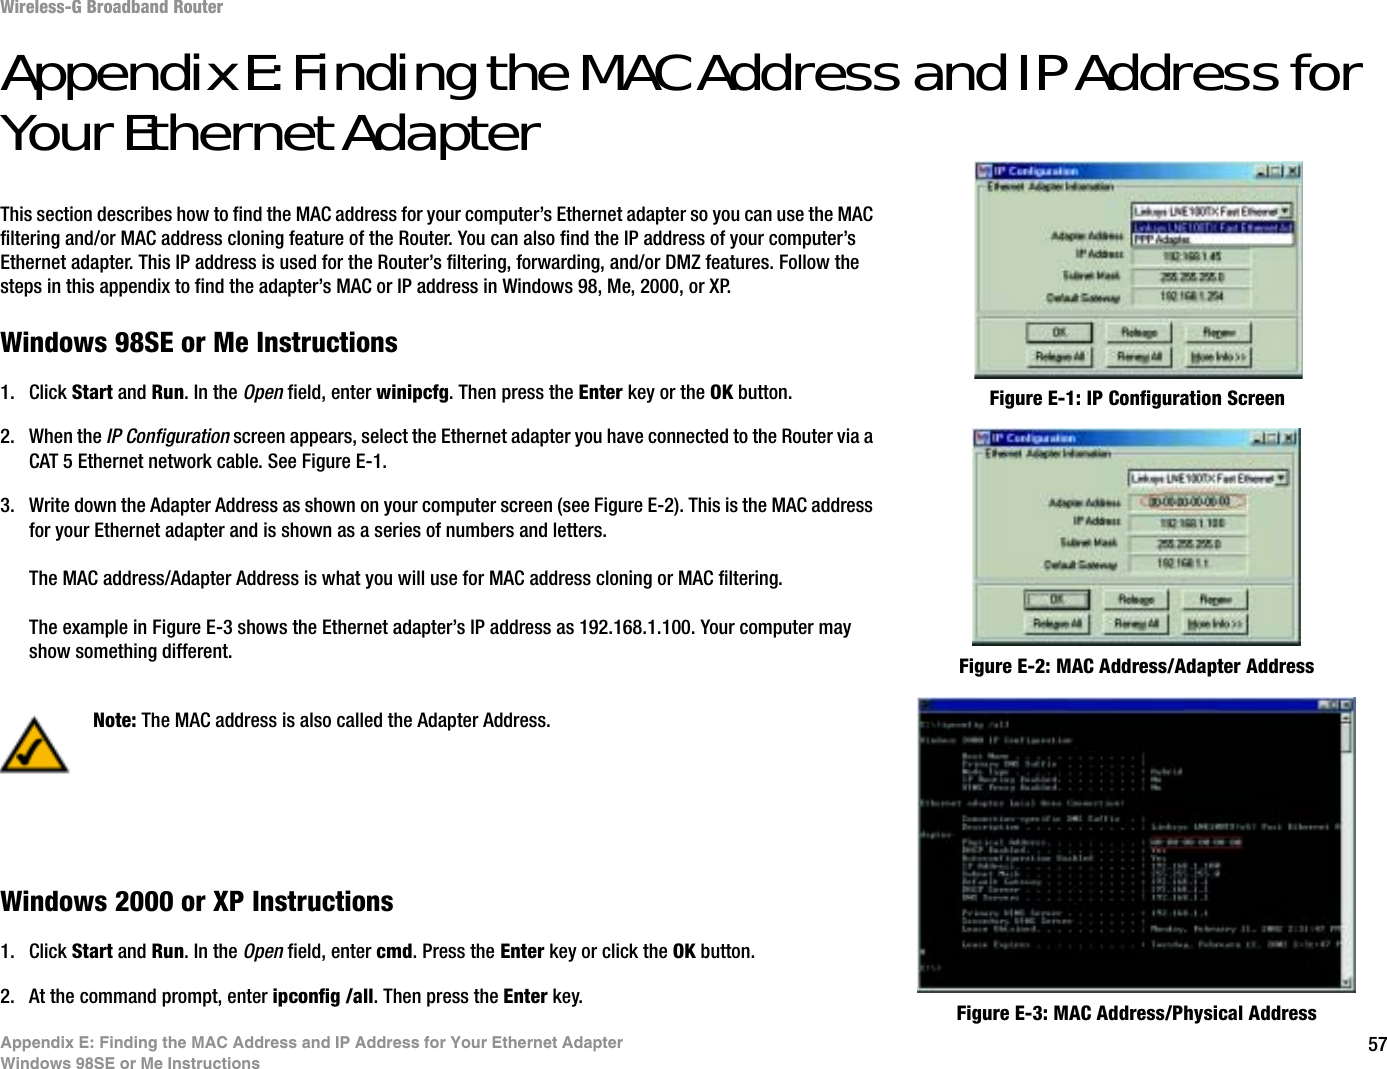 57Appendix E: Finding the MAC Address and IP Address for Your Ethernet AdapterWindows 98SE or Me InstructionsWireless-G Broadband RouterAppendix E: Finding the MAC Address and IP Address for Your Ethernet AdapterThis section describes how to find the MAC address for your computer’s Ethernet adapter so you can use the MAC filtering and/or MAC address cloning feature of the Router. You can also find the IP address of your computer’s Ethernet adapter. This IP address is used for the Router’s filtering, forwarding, and/or DMZ features. Follow the steps in this appendix to find the adapter’s MAC or IP address in Windows 98, Me, 2000, or XP.Windows 98SE or Me Instructions1. Click Start and Run. In the Open field, enter winipcfg. Then press the Enter key or the OK button. 2. When the IP Configuration screen appears, select the Ethernet adapter you have connected to the Router via a CAT 5 Ethernet network cable. See Figure E-1.3. Write down the Adapter Address as shown on your computer screen (see Figure E-2). This is the MAC address for your Ethernet adapter and is shown as a series of numbers and letters.The MAC address/Adapter Address is what you will use for MAC address cloning or MAC filtering.The example in Figure E-3 shows the Ethernet adapter’s IP address as 192.168.1.100. Your computer may show something different.Windows 2000 or XP Instructions1. Click Start and Run. In the Open field, enter cmd. Press the Enter key or click the OK button.2. At the command prompt, enter ipconfig /all. Then press the Enter key.Figure E-2: MAC Address/Adapter AddressFigure E-1: IP Configuration ScreenNote: The MAC address is also called the Adapter Address.Figure E-3: MAC Address/Physical Address